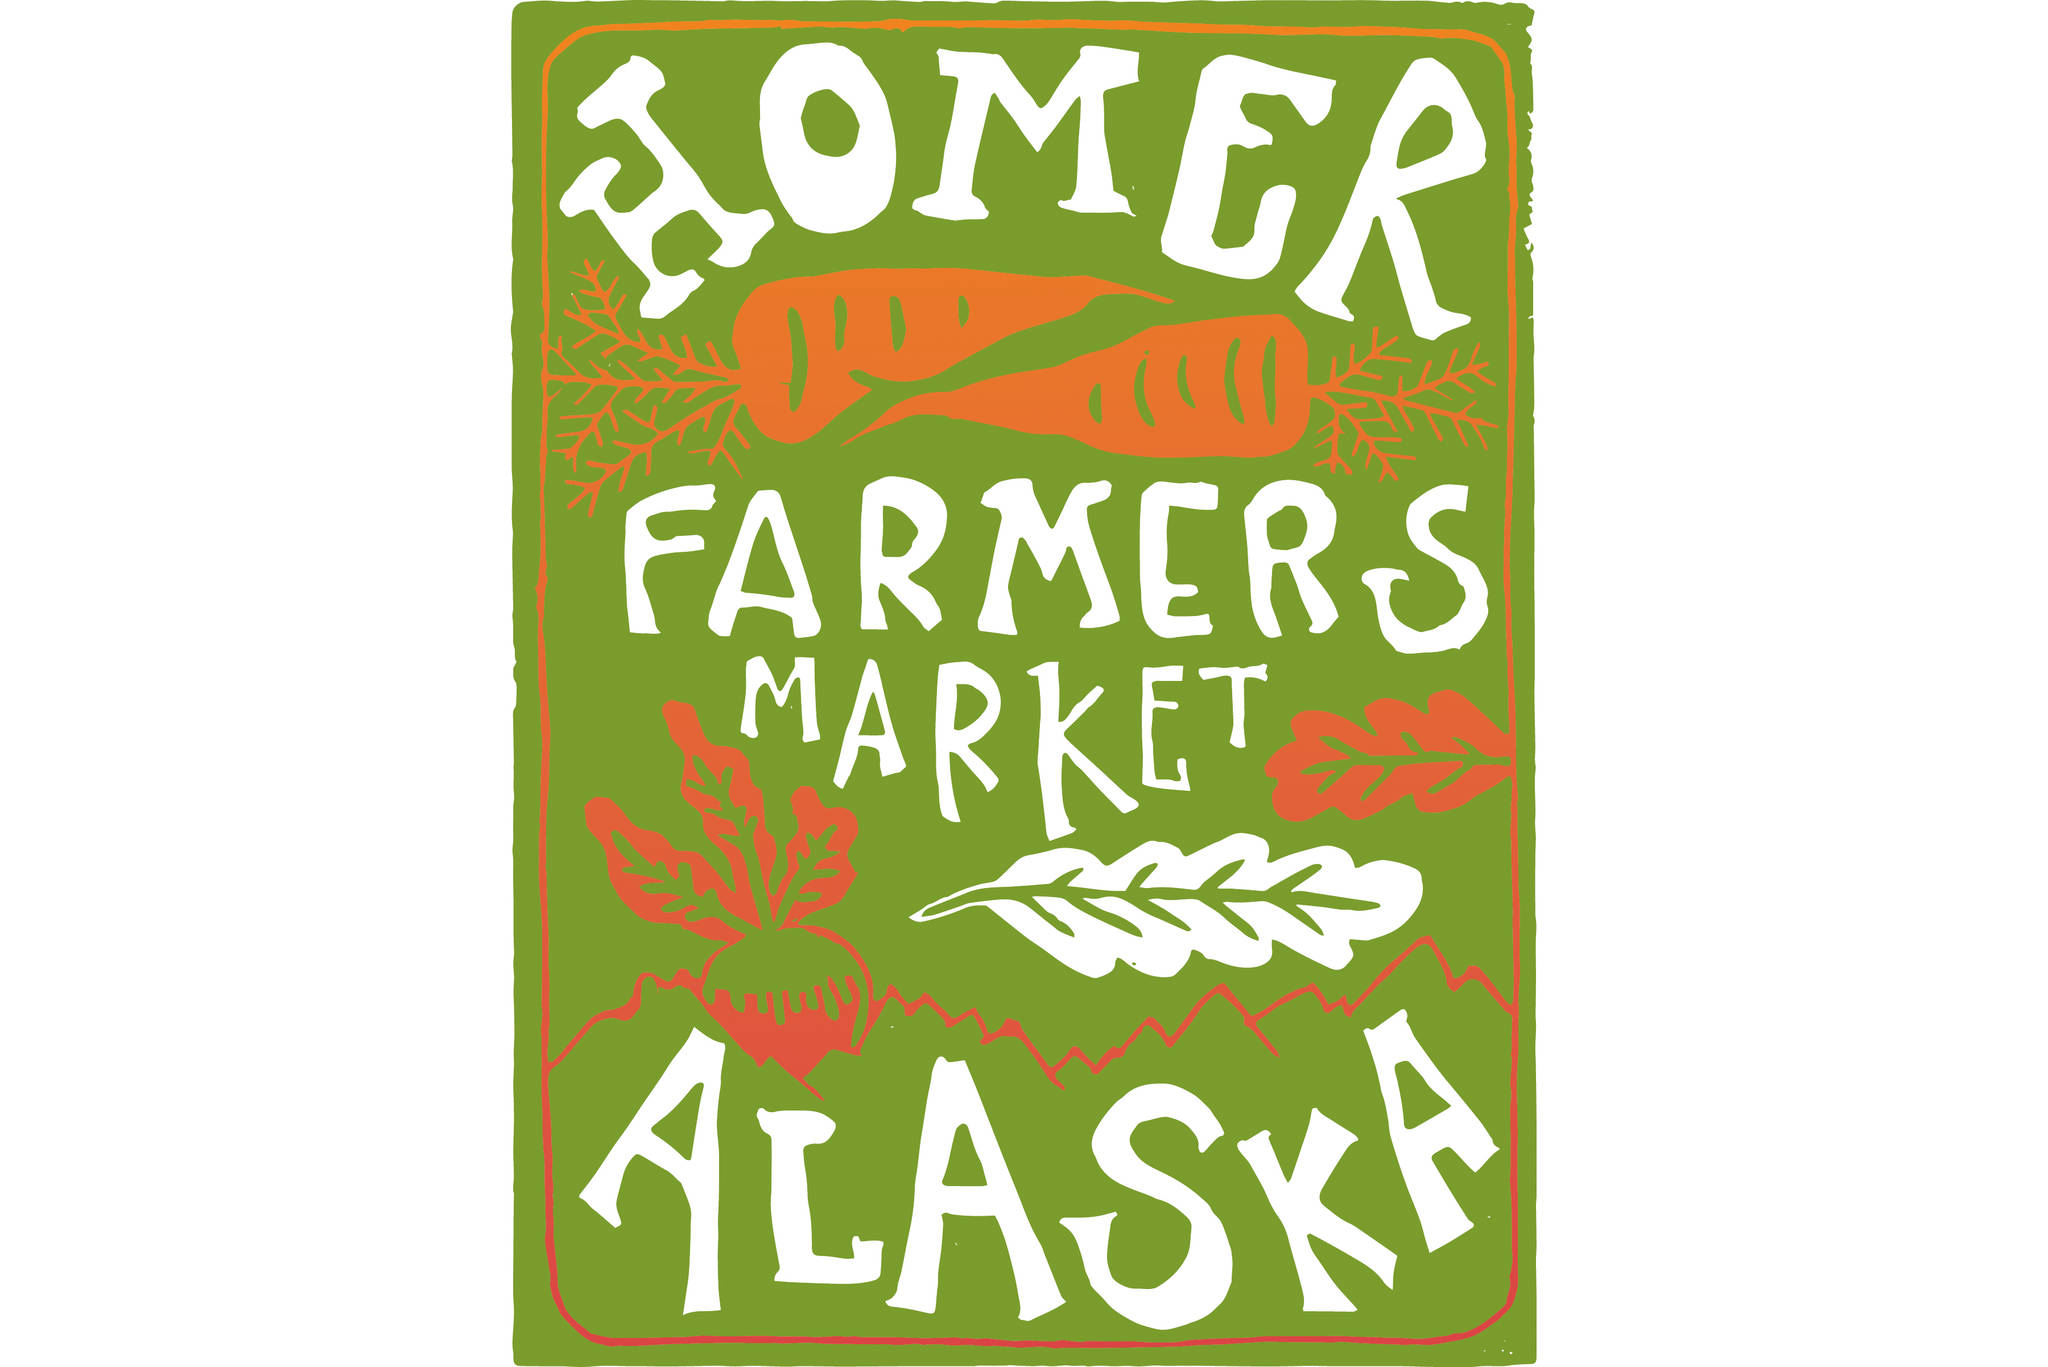 Homer Farmers Market: The Market is all about the food